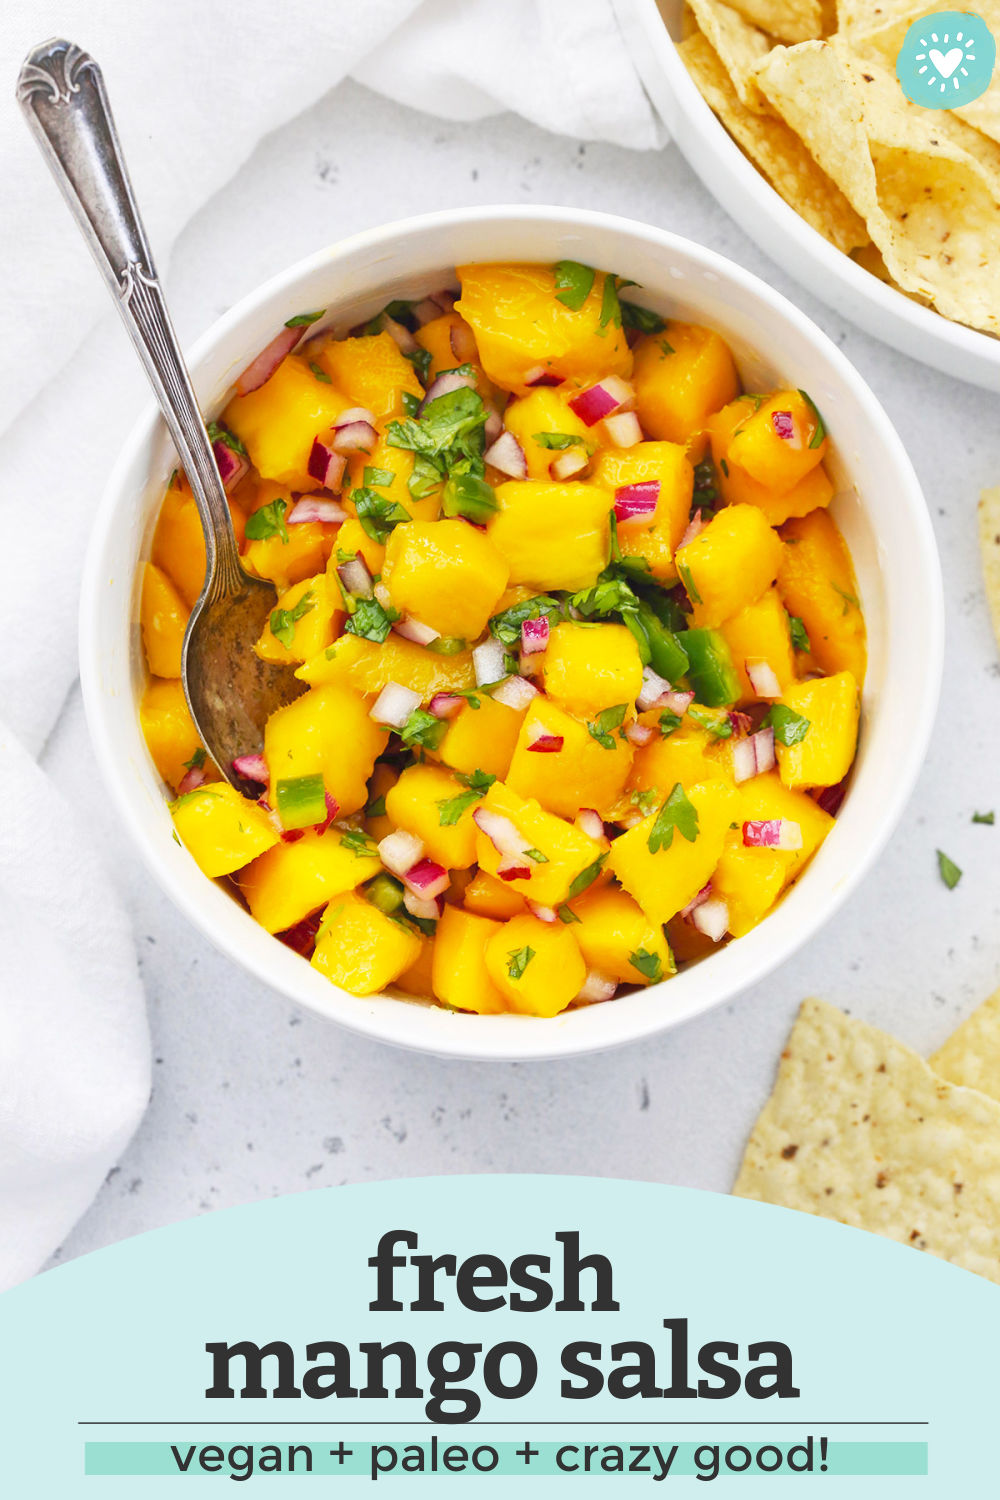 Fresh Mango Salsa - This mango salsa makes just about anything taste better! It's the perfect blend of spicy and sweet. (Naturally gluten-free, vegan, and paleo) // Mango Salsa Recipe // Easy Homemade Salsa // Tex-Mex // Healthy appetizer // Healthy dip // mango recipes // mango salsa for tacos // #mango #mangosalsa #salsa #appetizer #dip